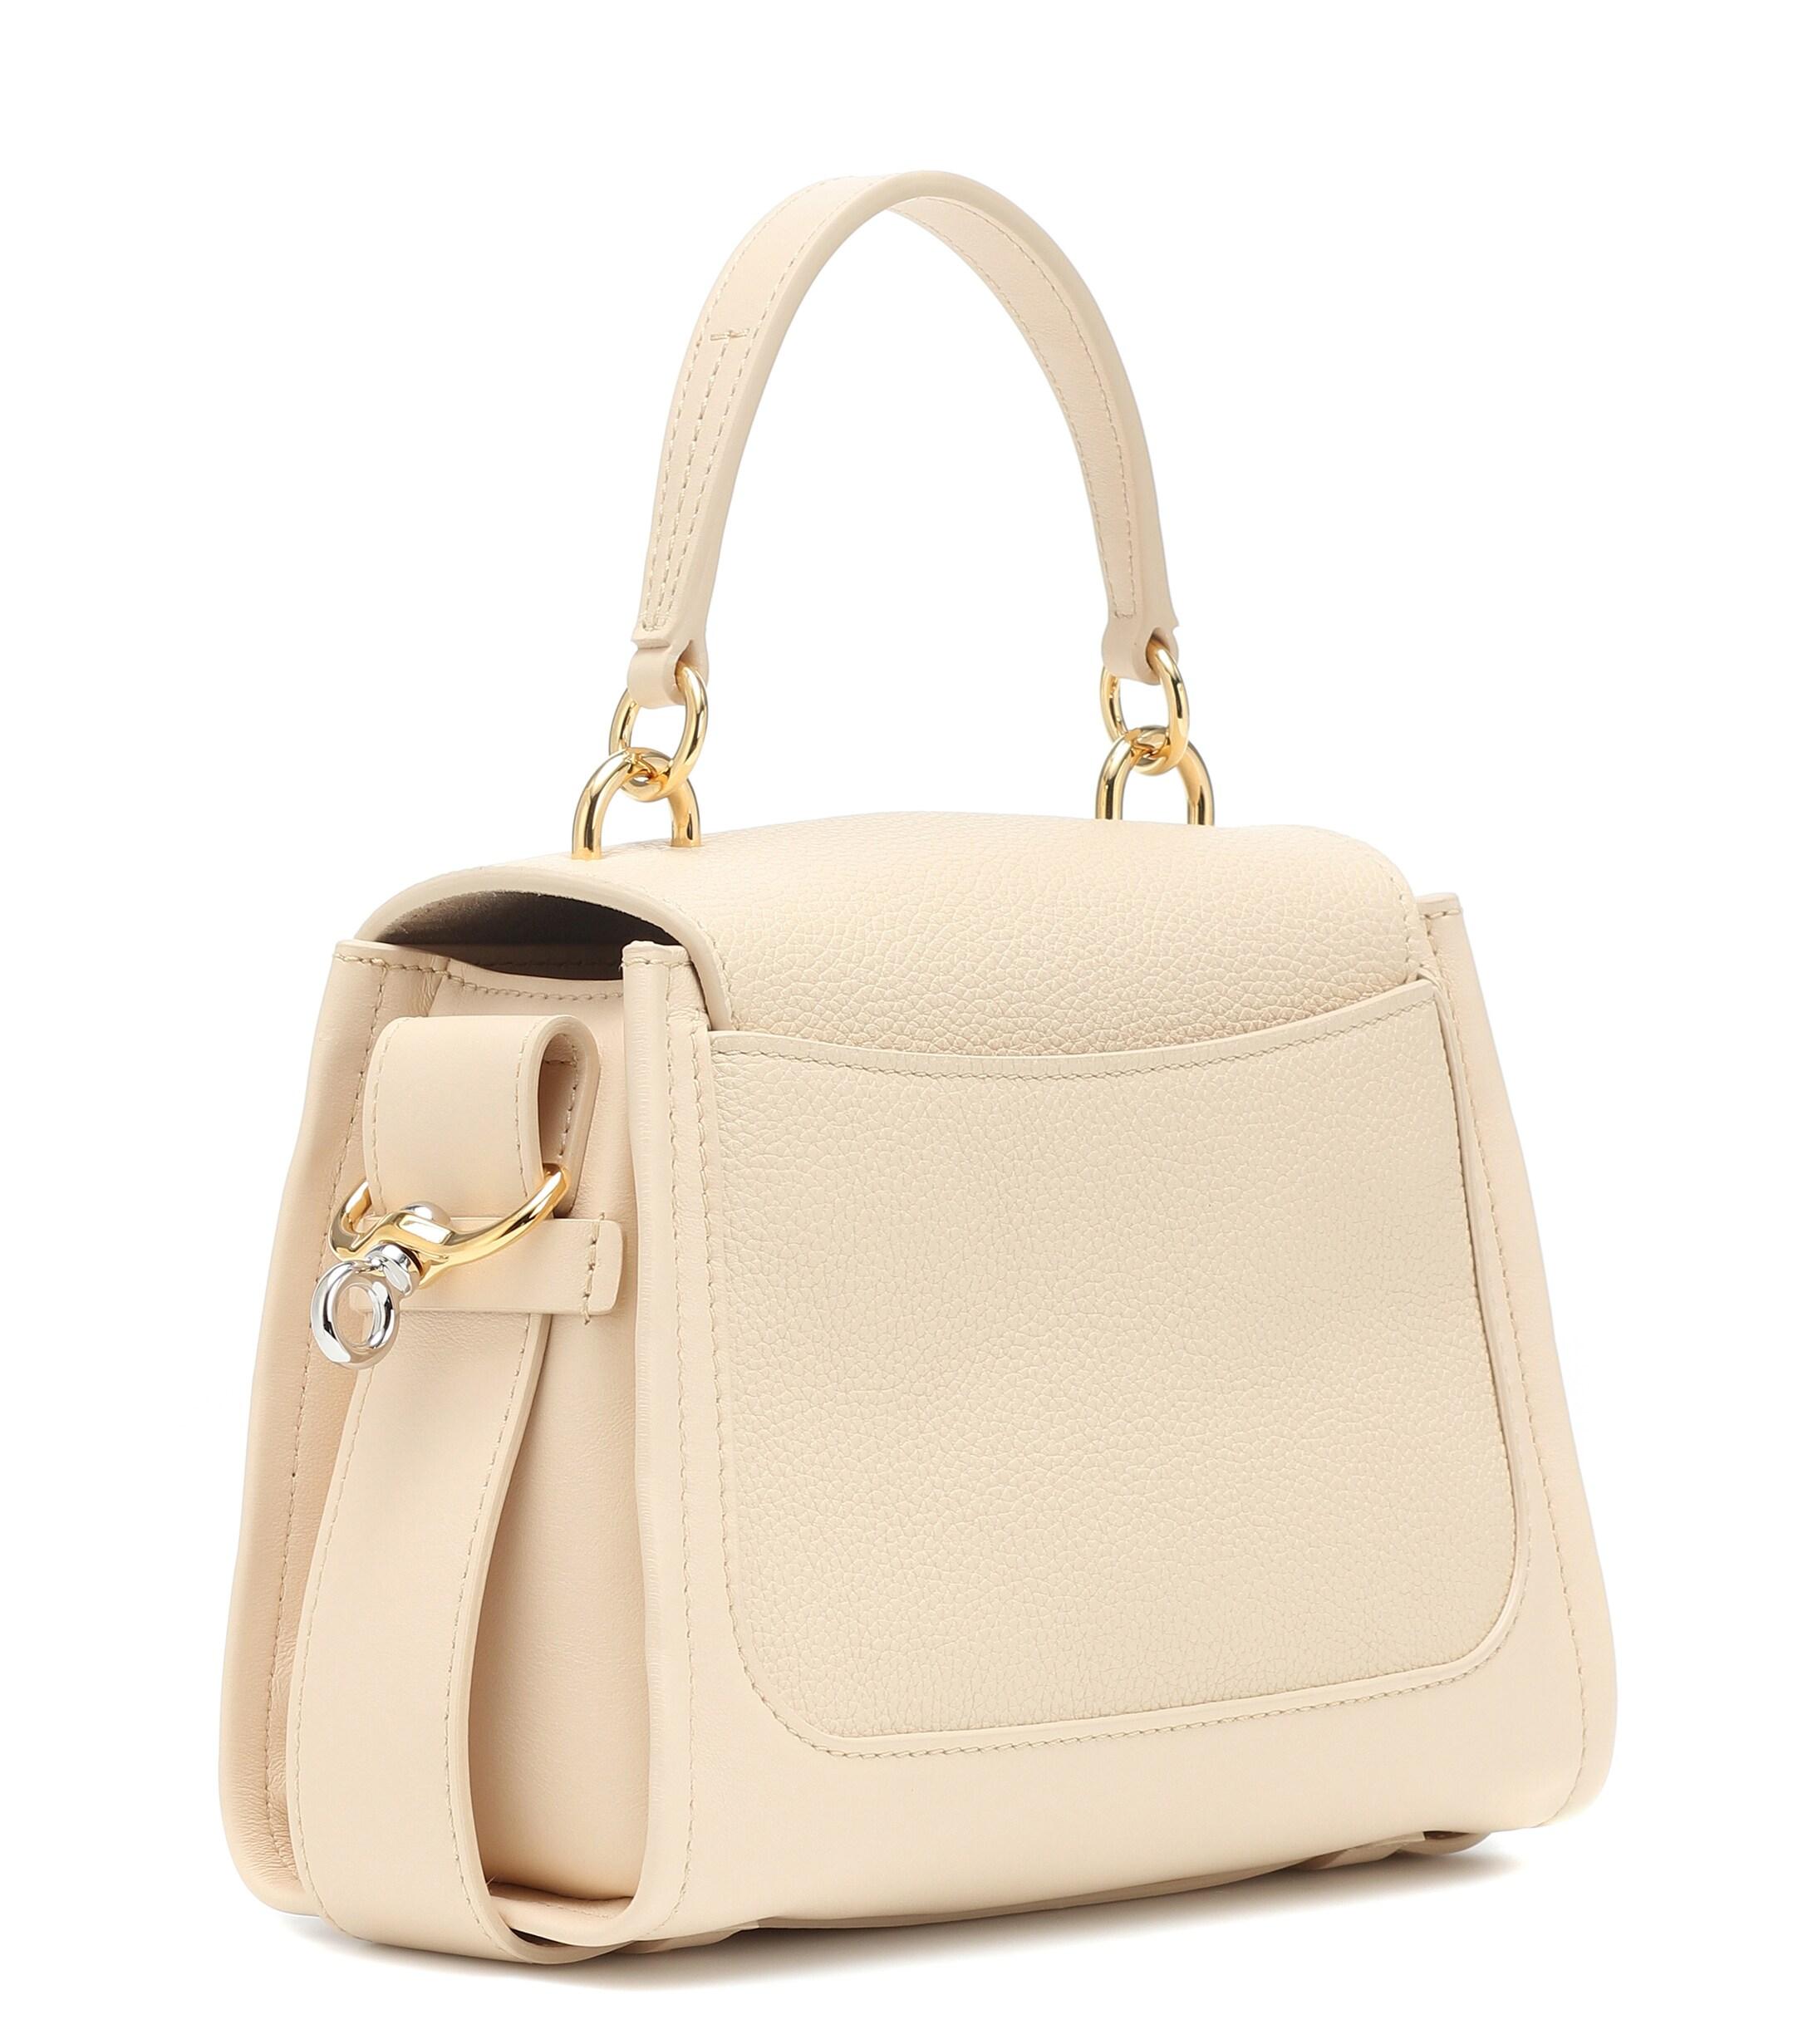 Chloé Tess Day Small Leather Shoulder Bag in Beige (Natural) - Lyst